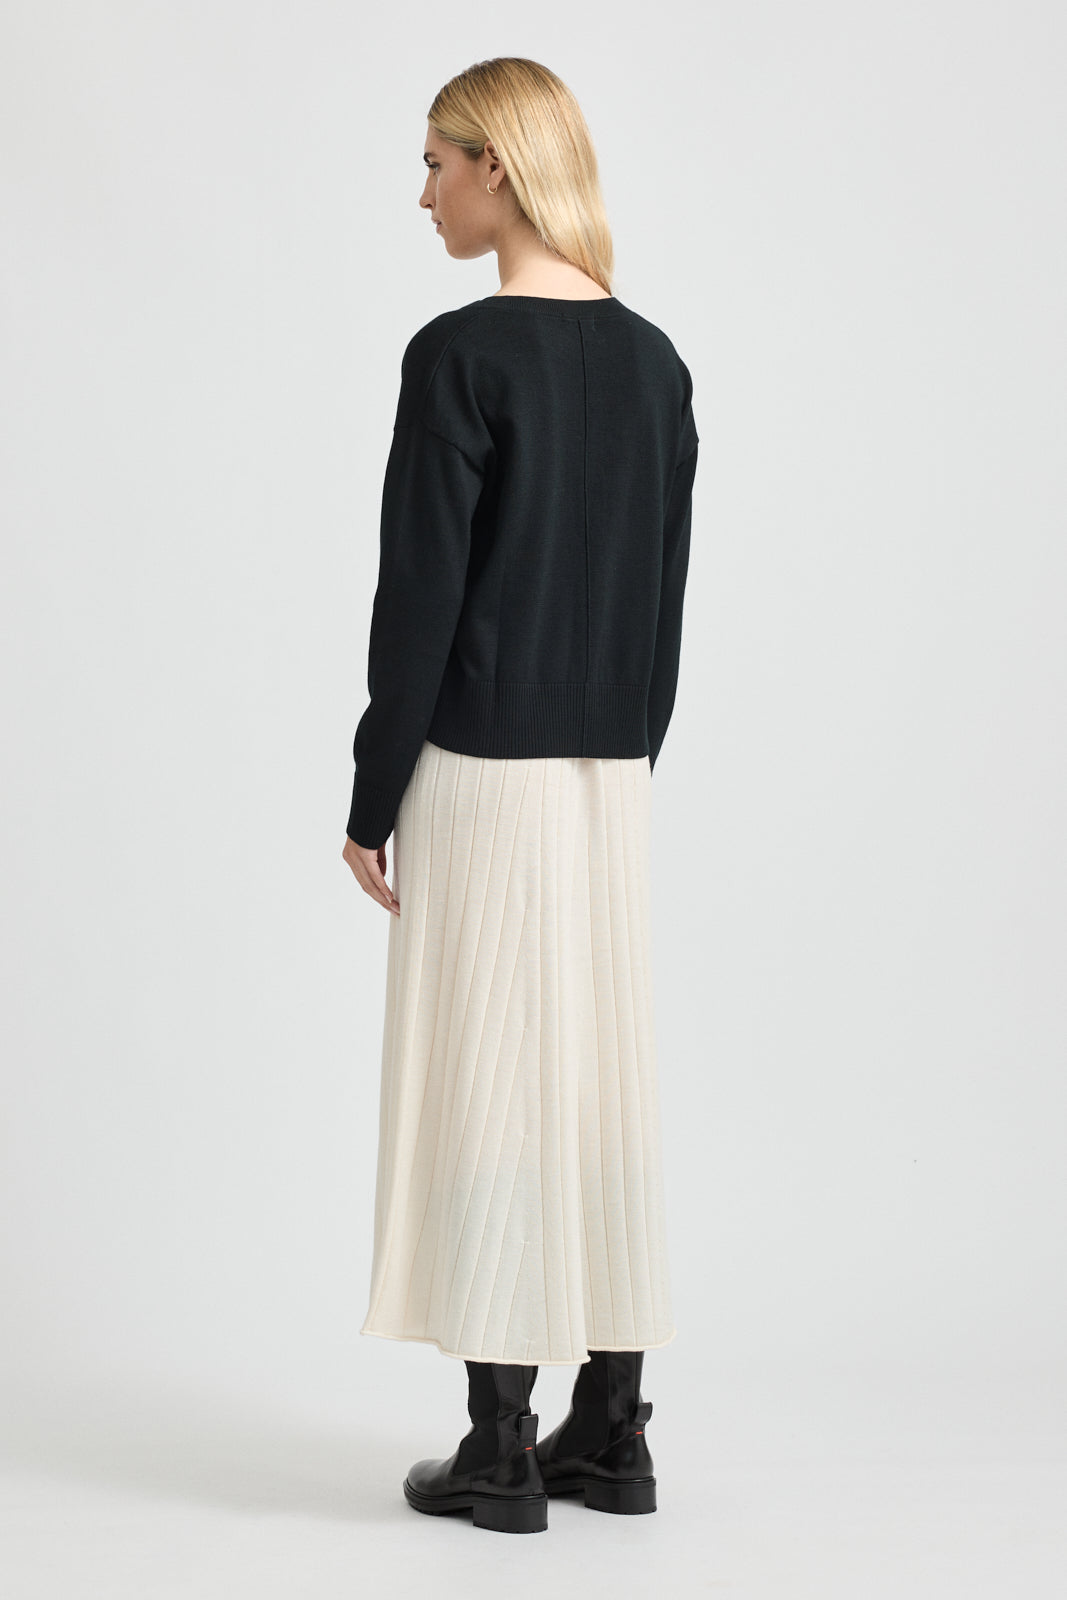 TOORALLIE FINE KNIT CARDIGAN - BLACK - THE VOGUE STORE